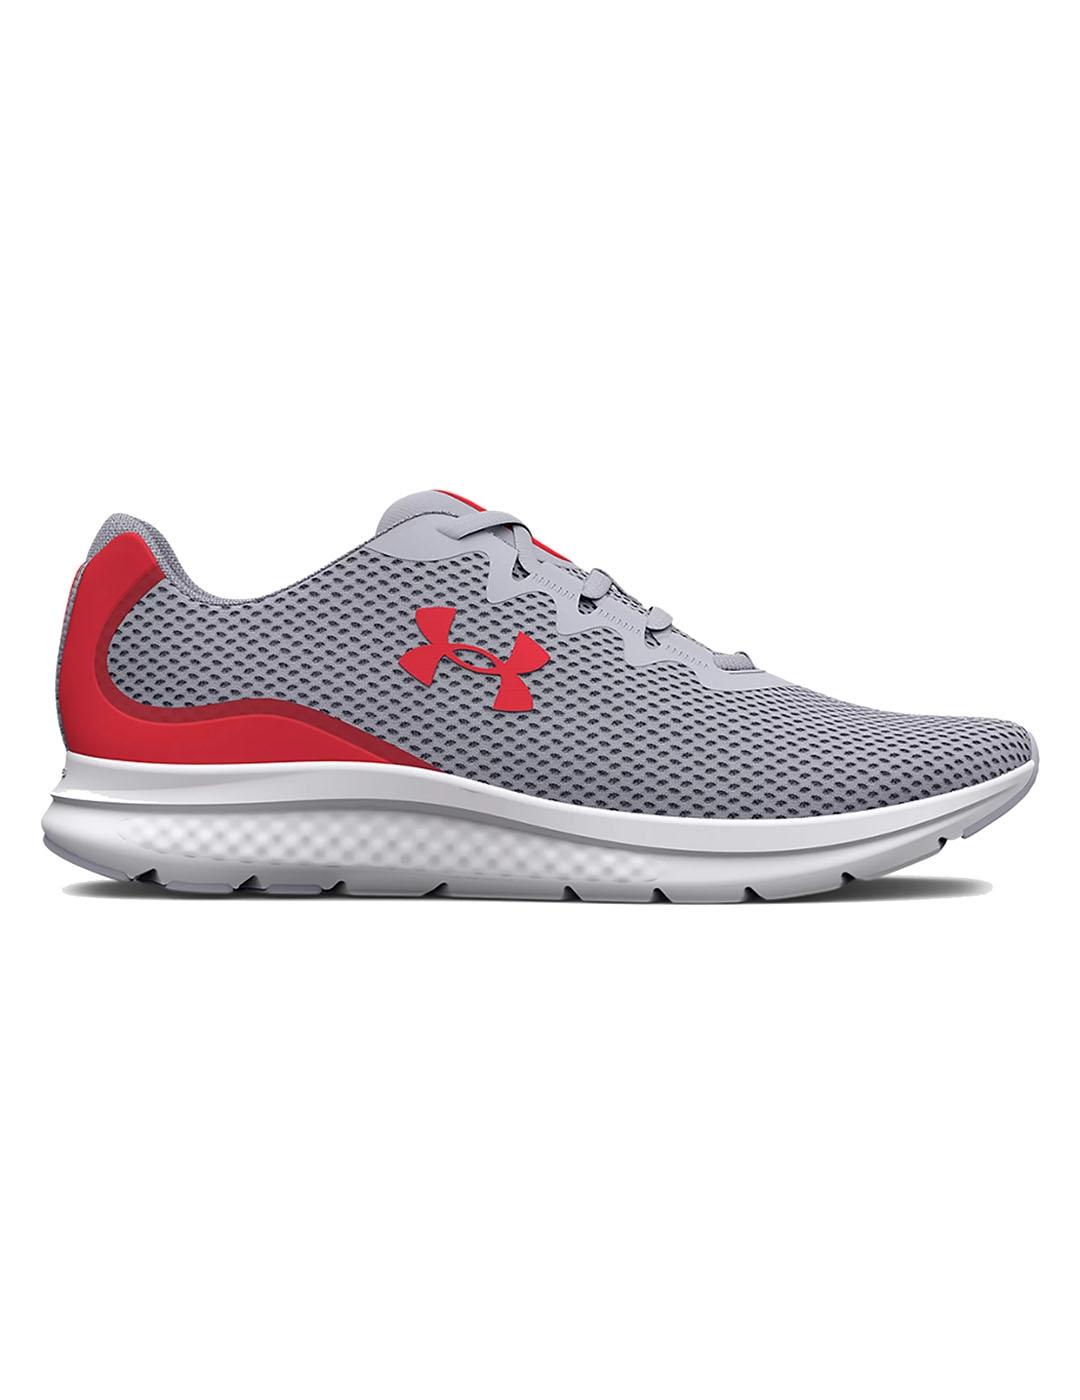 Zapatillas Hombre Under Armour Charged Gris Rojo